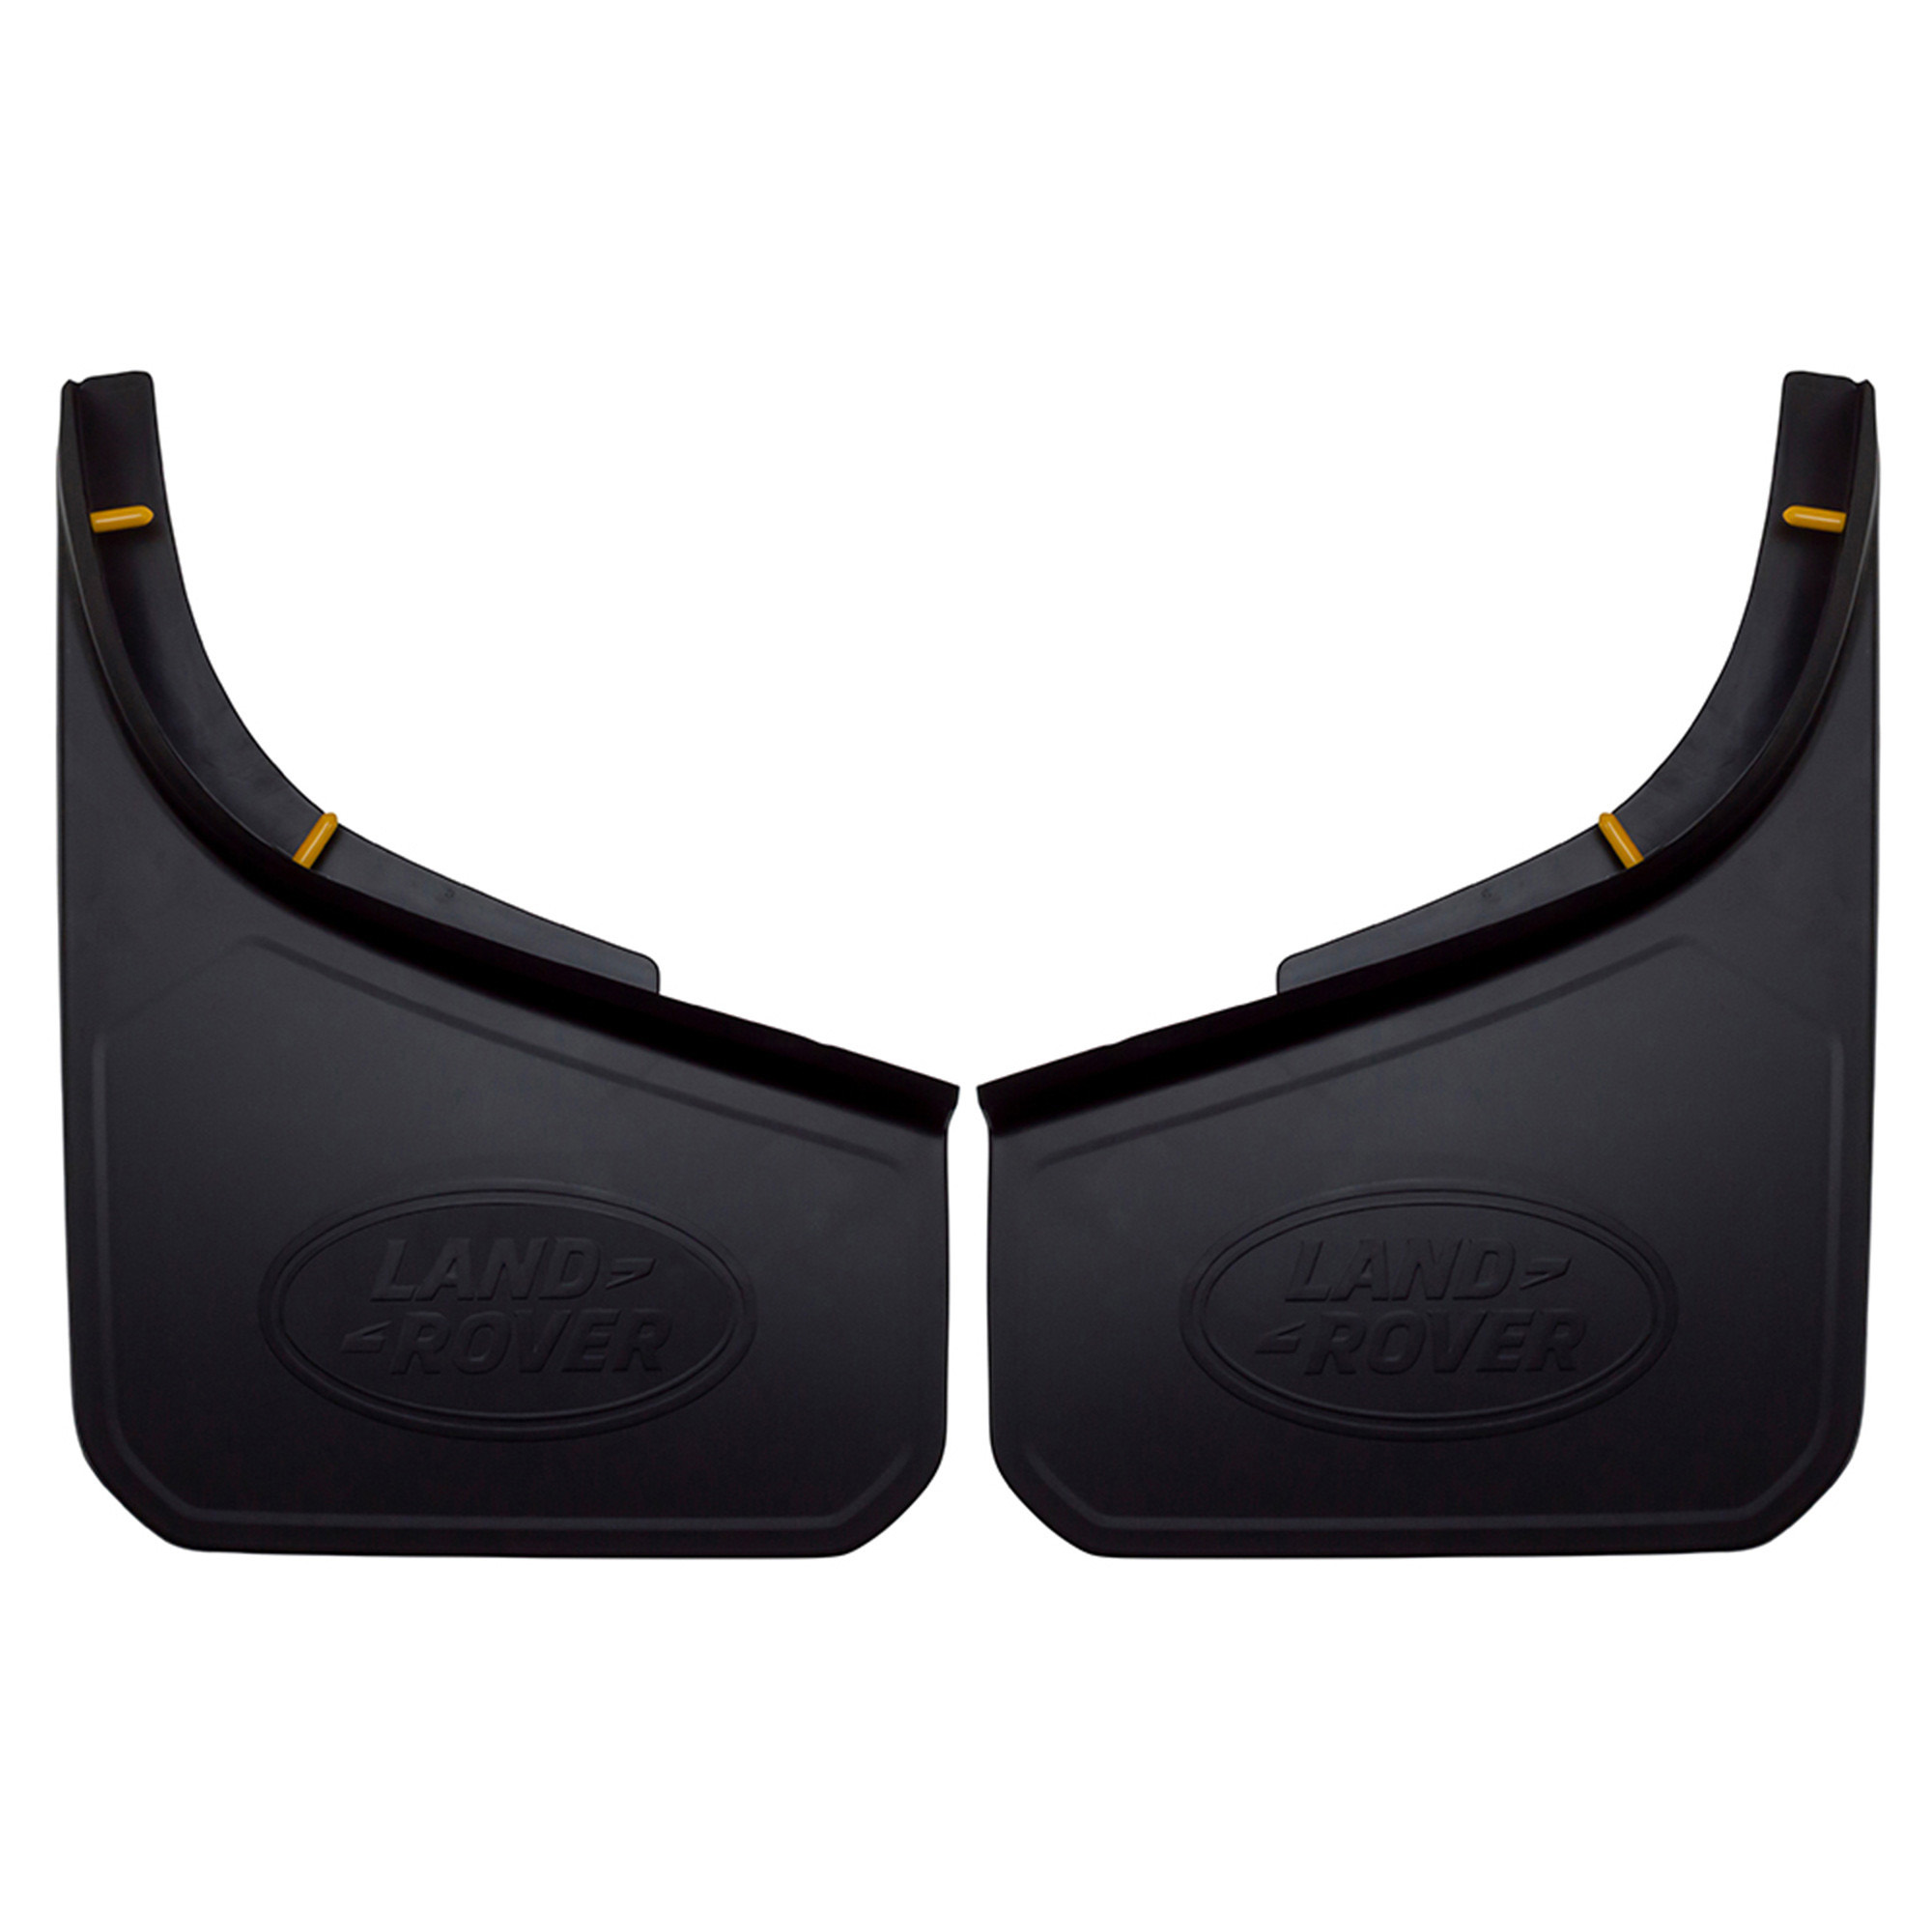 FF012399 - Mudflaps - Rear - Land Rover New Defender